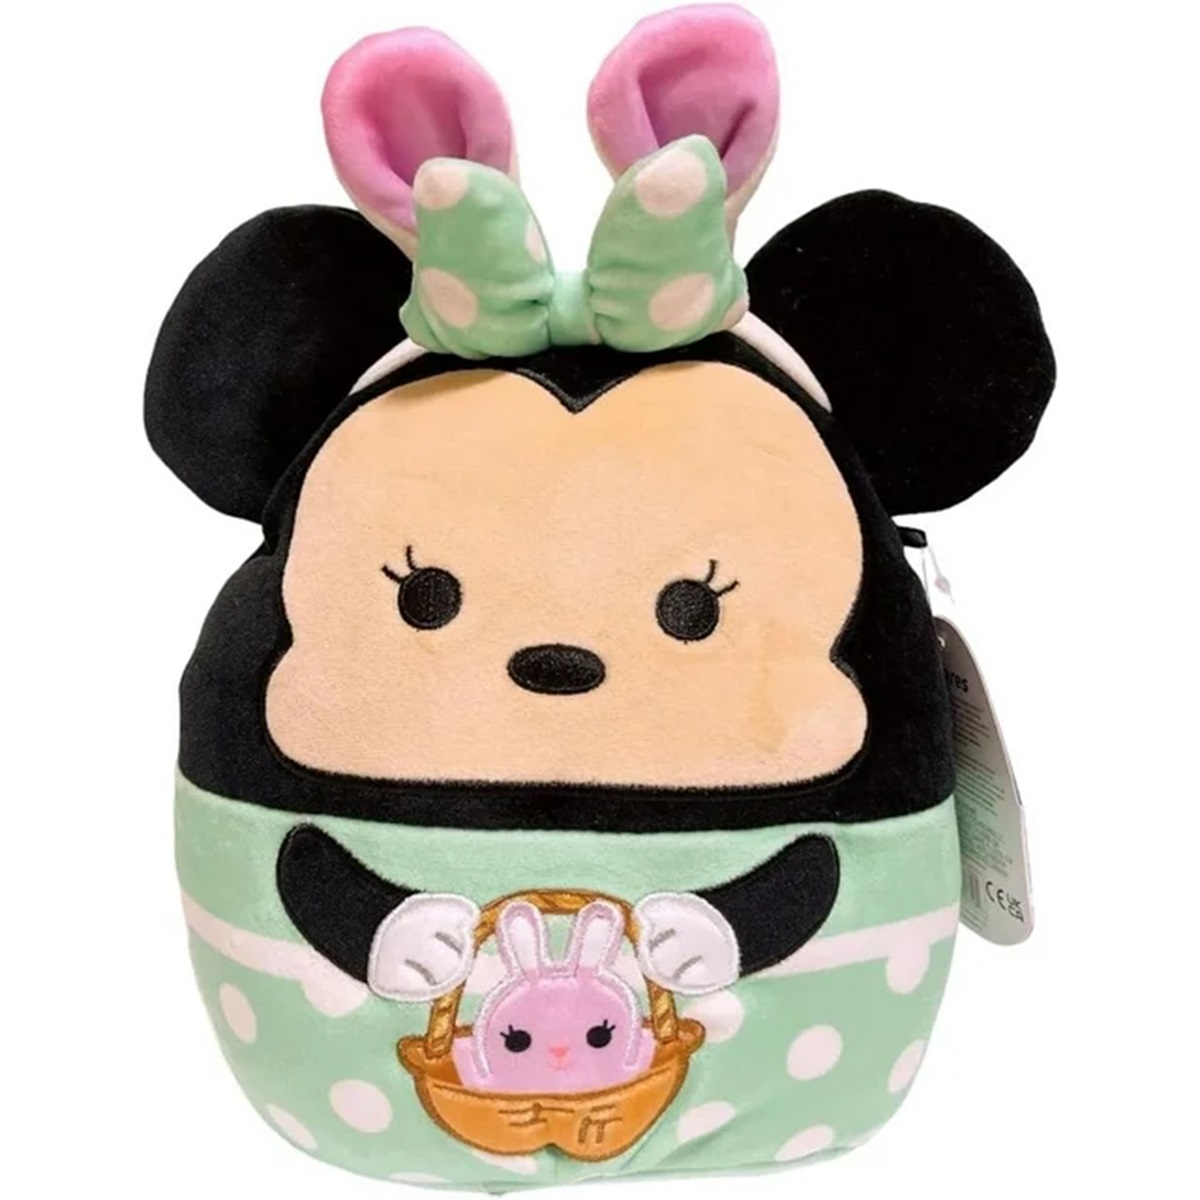 8" Minnie Mouse with Bunny Ears Easter Squishmallow